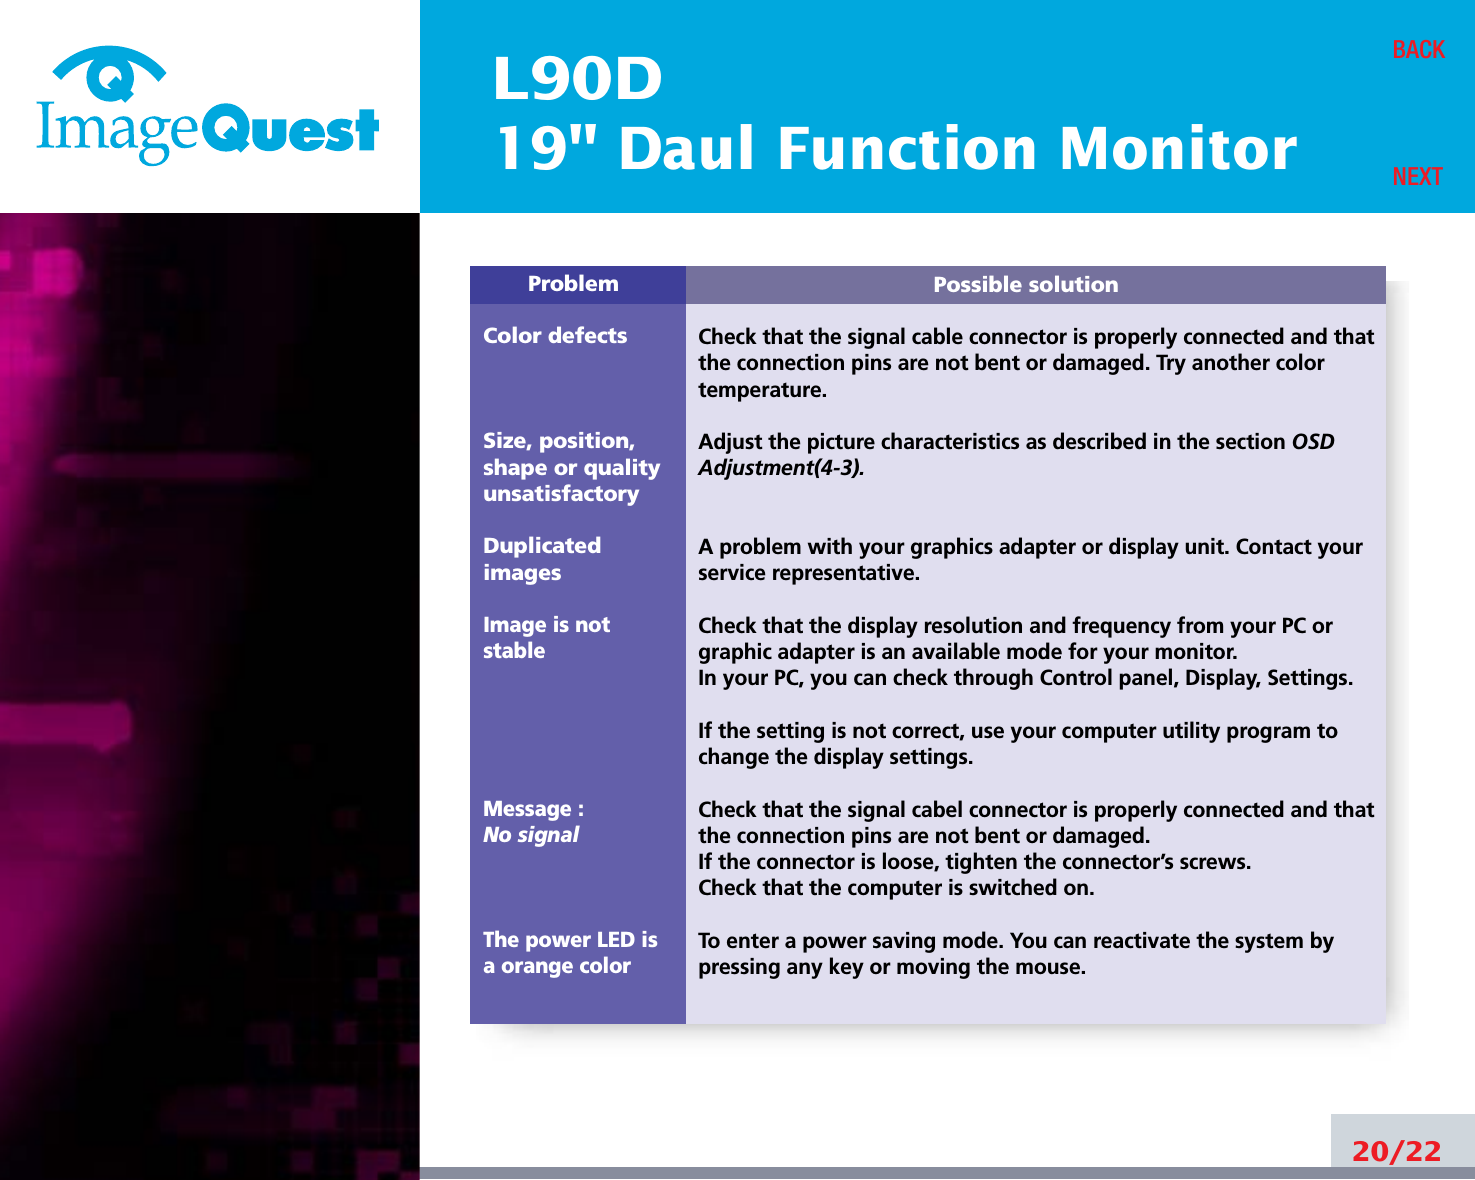 L90D19&quot; Daul Function Monitor20/22BACKNEXTPossible solutionCheck that the signal cable connector is properly connected and thatthe connection pins are not bent or damaged. Try another colortemperature. Adjust the picture characteristics as described in the section OSDAdjustment(4-3).A problem with your graphics adapter or display unit. Contact yourservice representative.Check that the display resolution and frequency from your PC orgraphic adapter is an available mode for your monitor.In your PC, you can check through Control panel, Display, Settings.If the setting is not correct, use your computer utility program tochange the display settings.Check that the signal cabel connector is properly connected and thatthe connection pins are not bent or damaged.If the connector is loose, tighten the connector’s screws.Check that the computer is switched on.To enter a power saving mode. You can reactivate the system bypressing any key or moving the mouse.ProblemColor defectsSize, position,shape or qualityunsatisfactoryDuplicatedimagesImage is notstableMessage : No signalThe power LED isa orange color